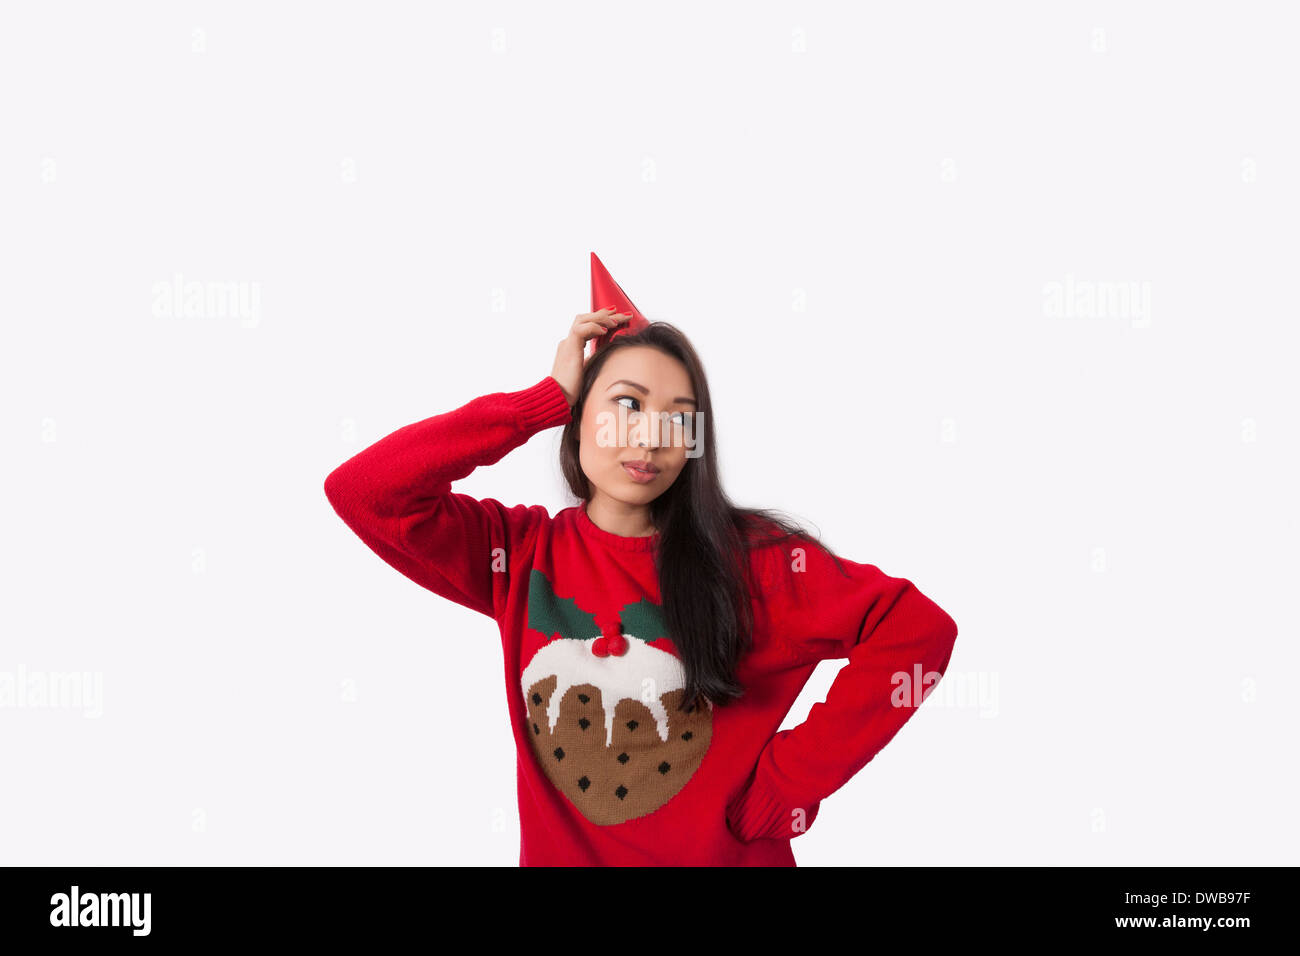 Woman wearing Christmas jumper and party hat against gray background Stock Photo